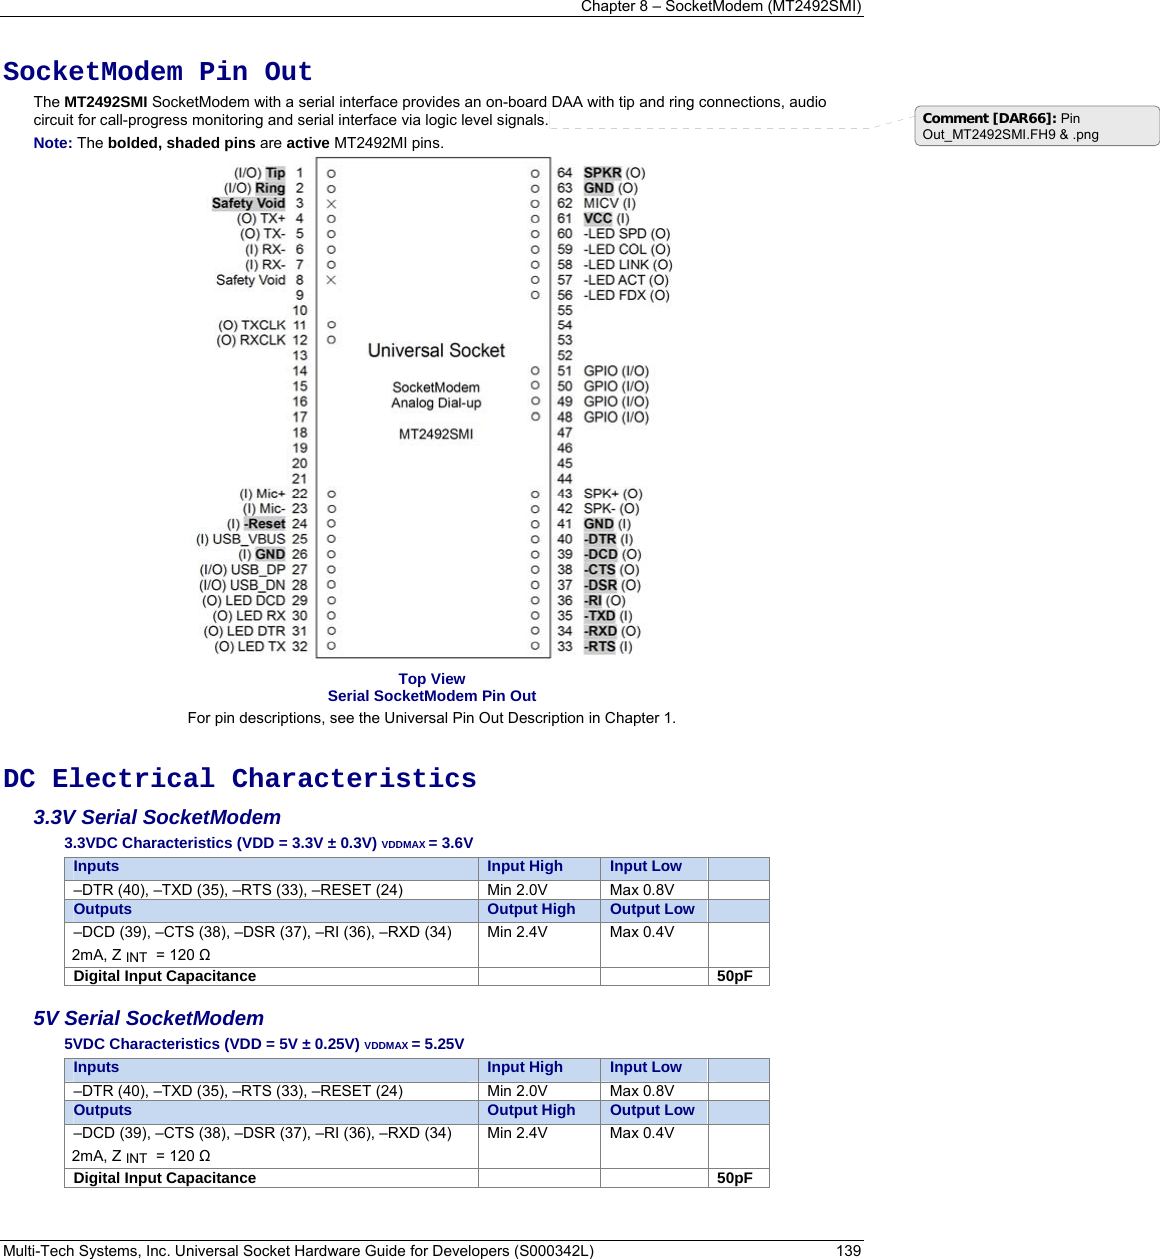 Chapter 8 – SocketModem (MT2492SMI) Multi-Tech Systems, Inc. Universal Socket Hardware Guide for Developers (S000342L)  139   SocketModem Pin Out The MT2492SMI SocketModem with a serial interface provides an on-board DAA with tip and ring connections, audio circuit for call-progress monitoring and serial interface via logic level signals. Note: The bolded, shaded pins are active MT2492MI pins.  Top View Serial SocketModem Pin Out For pin descriptions, see the Universal Pin Out Description in Chapter 1.   DC Electrical Characteristics 3.3V Serial SocketModem 3.3VDC Characteristics (VDD = 3.3V ± 0.3V) VDDMAX = 3.6V Inputs  Input High  Input Low   –DTR (40), –TXD (35), –RTS (33), –RESET (24)  Min 2.0V  Max 0.8V   Outputs  Output High  Output Low   –DCD (39), –CTS (38), –DSR (37), –RI (36), –RXD (34) 2mA, Z INT  = 120 Ω Min 2.4V  Max 0.4V   Digital Input Capacitance   50pF 5V Serial SocketModem 5VDC Characteristics (VDD = 5V ± 0.25V) VDDMAX = 5.25V Inputs  Input High  Input Low   –DTR (40), –TXD (35), –RTS (33), –RESET (24)  Min 2.0V  Max 0.8V   Outputs  Output High  Output Low   –DCD (39), –CTS (38), –DSR (37), –RI (36), –RXD (34) 2mA, Z INT  = 120 Ω Min 2.4V  Max 0.4V   Digital Input Capacitance   50pF   Comment [DAR66]: Pin Out_MT2492SMI.FH9 &amp; .png